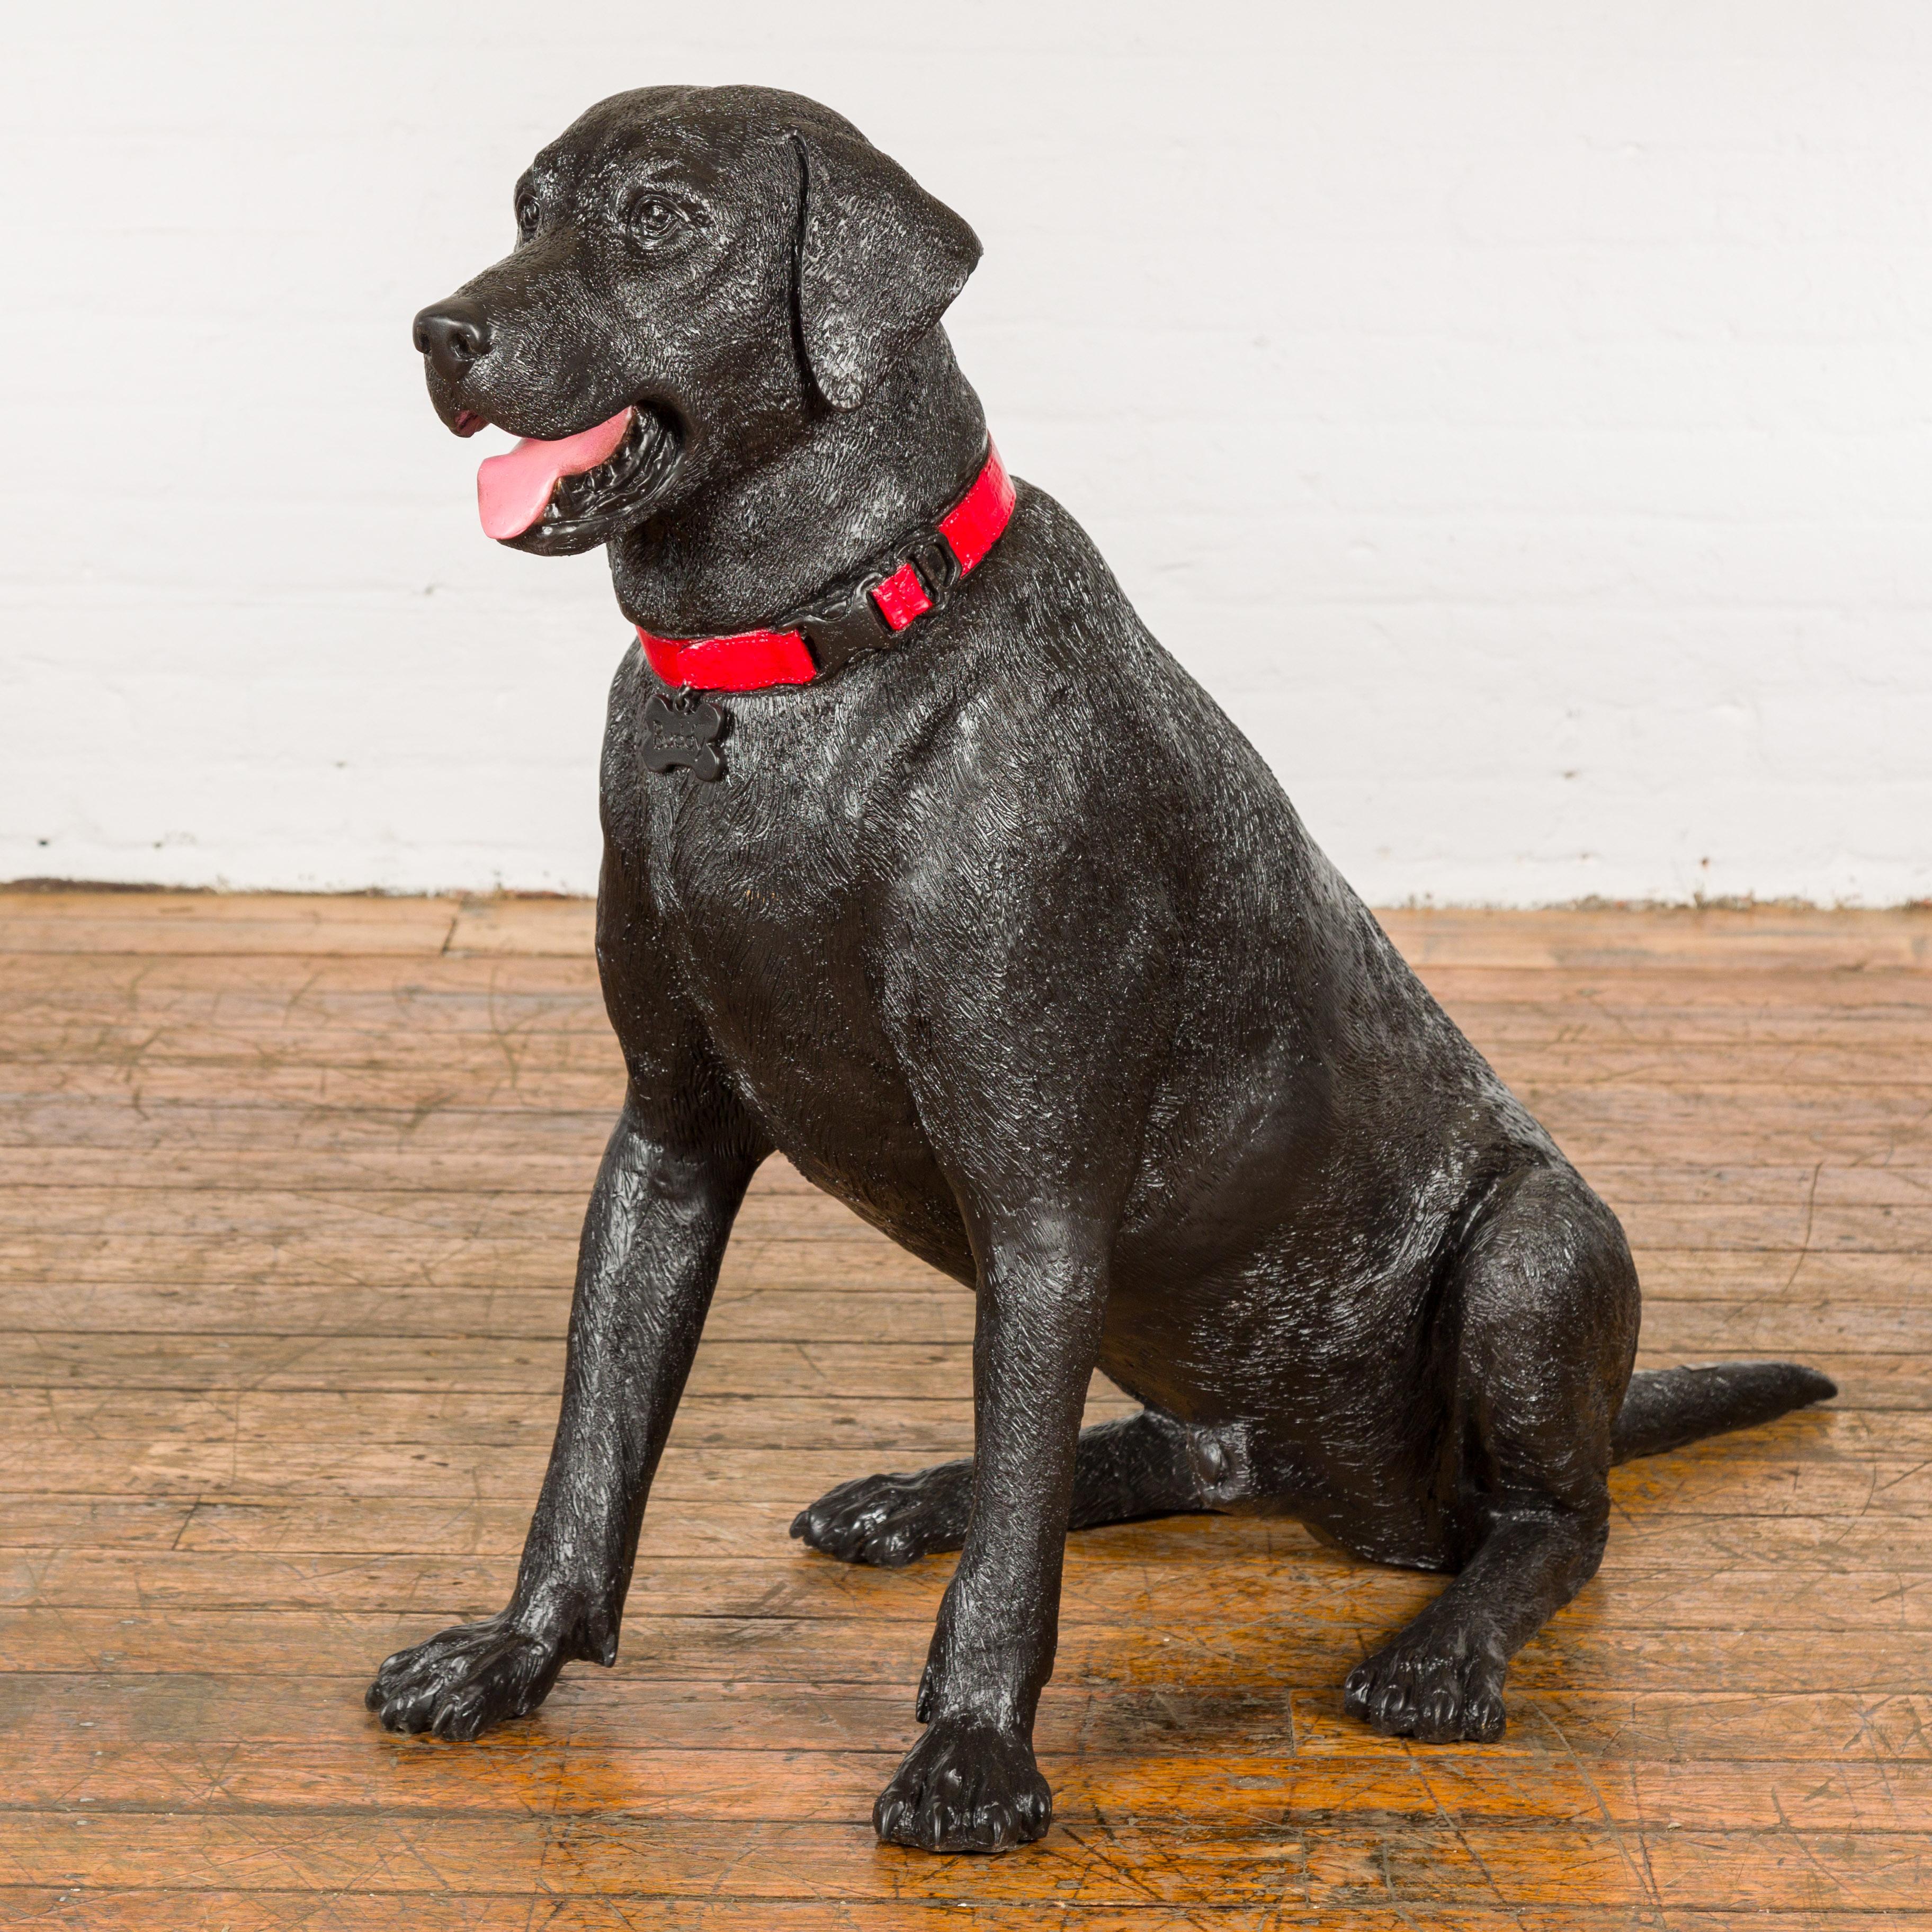 Buddy, sitting Labrador bronze dog sculpture with red collar. Meet Buddy, a limited-edition bronze Labrador sculpture that captivates the heart with his lifelike charm and obedience. Sitting in a poised posture with a red collar, Buddy is a